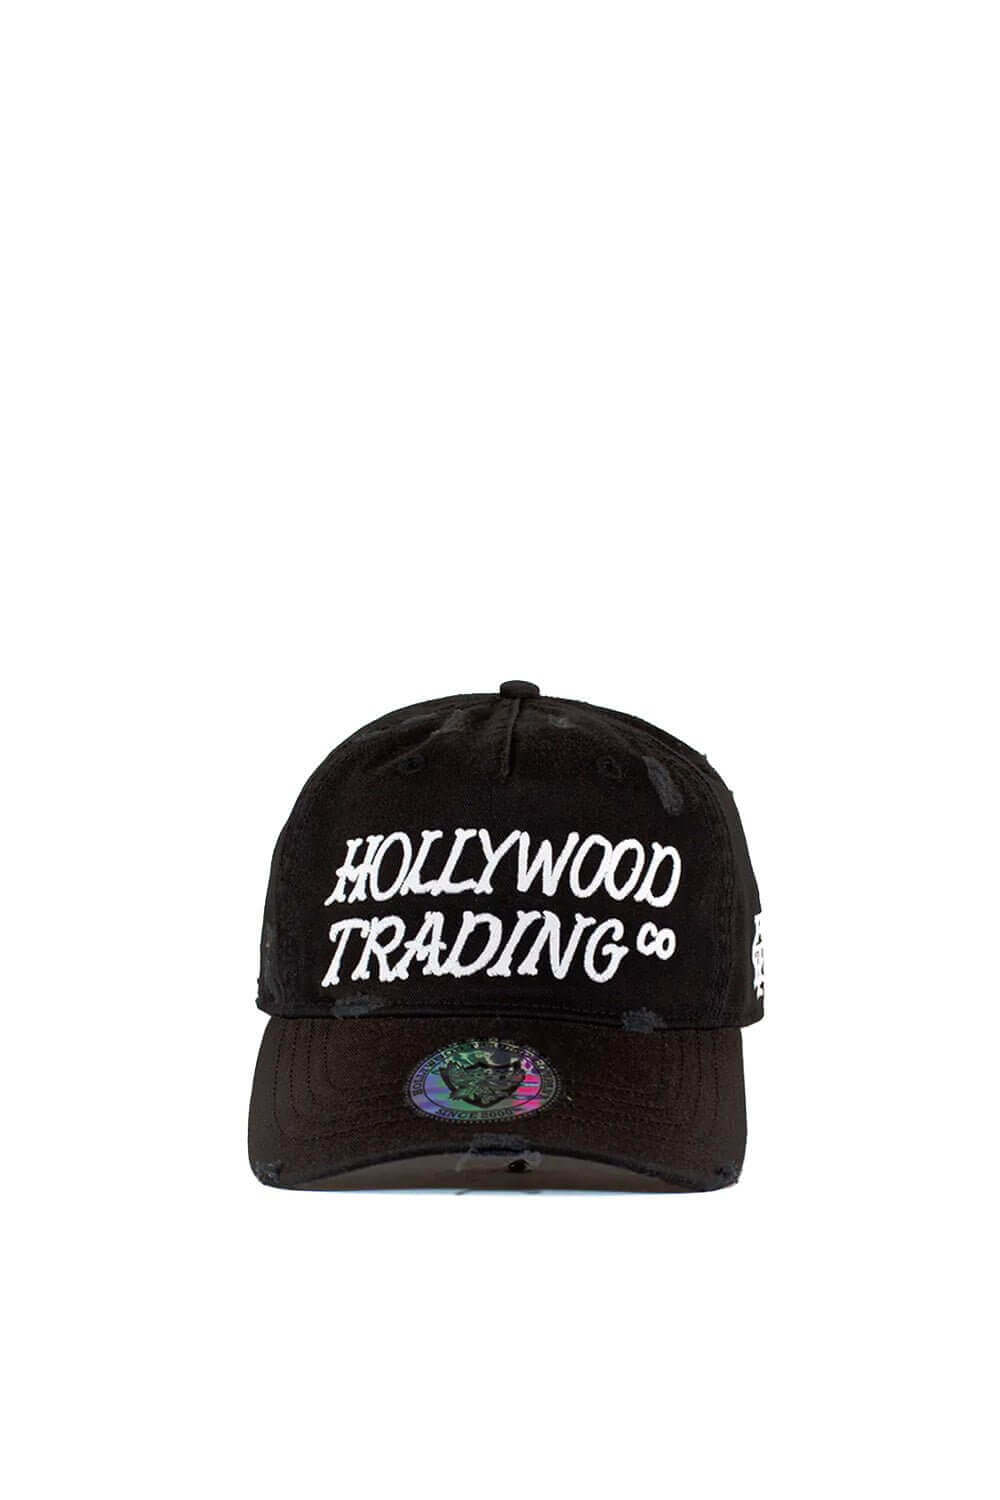 HOLLYWOOD T.C. BLK CAP Baseball cap with preformed peak, round crown with eyelets, Hollywood TC embroidered on the front, adjustable strap on the back. One size fits all. 100% cotton. HTC LOS ANGELES